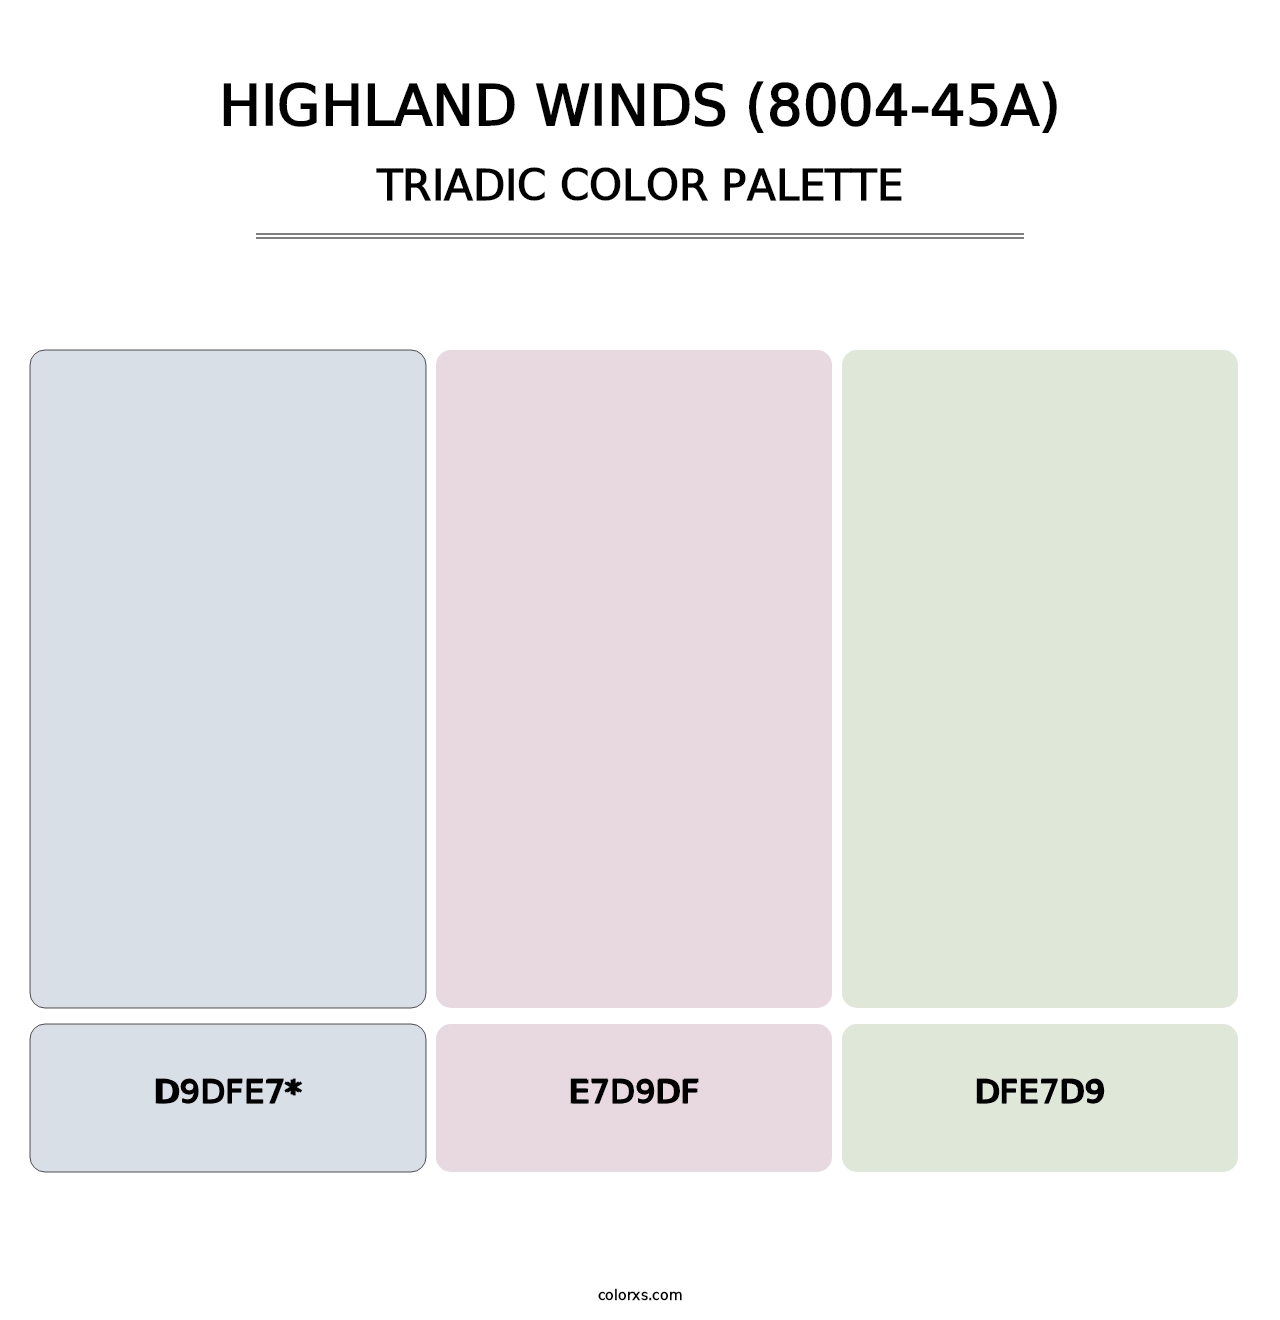 Highland Winds (8004-45A) - Triadic Color Palette